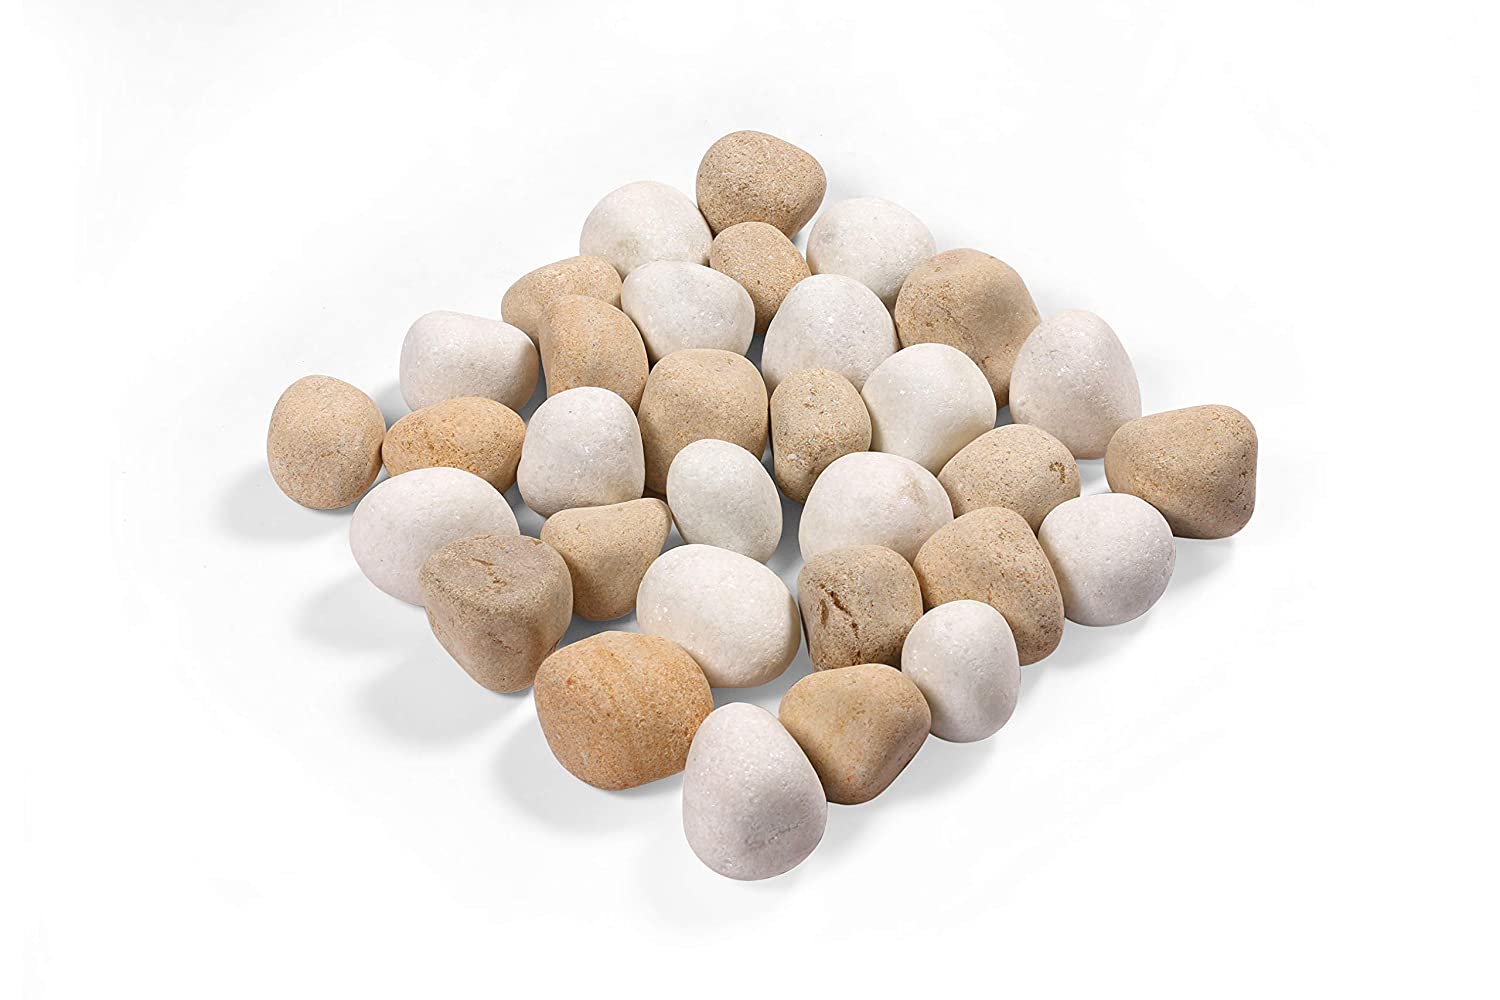 StoneStories Snow-White And Yellow Mixed Stones (15 Kgs, 2-3 Inches)